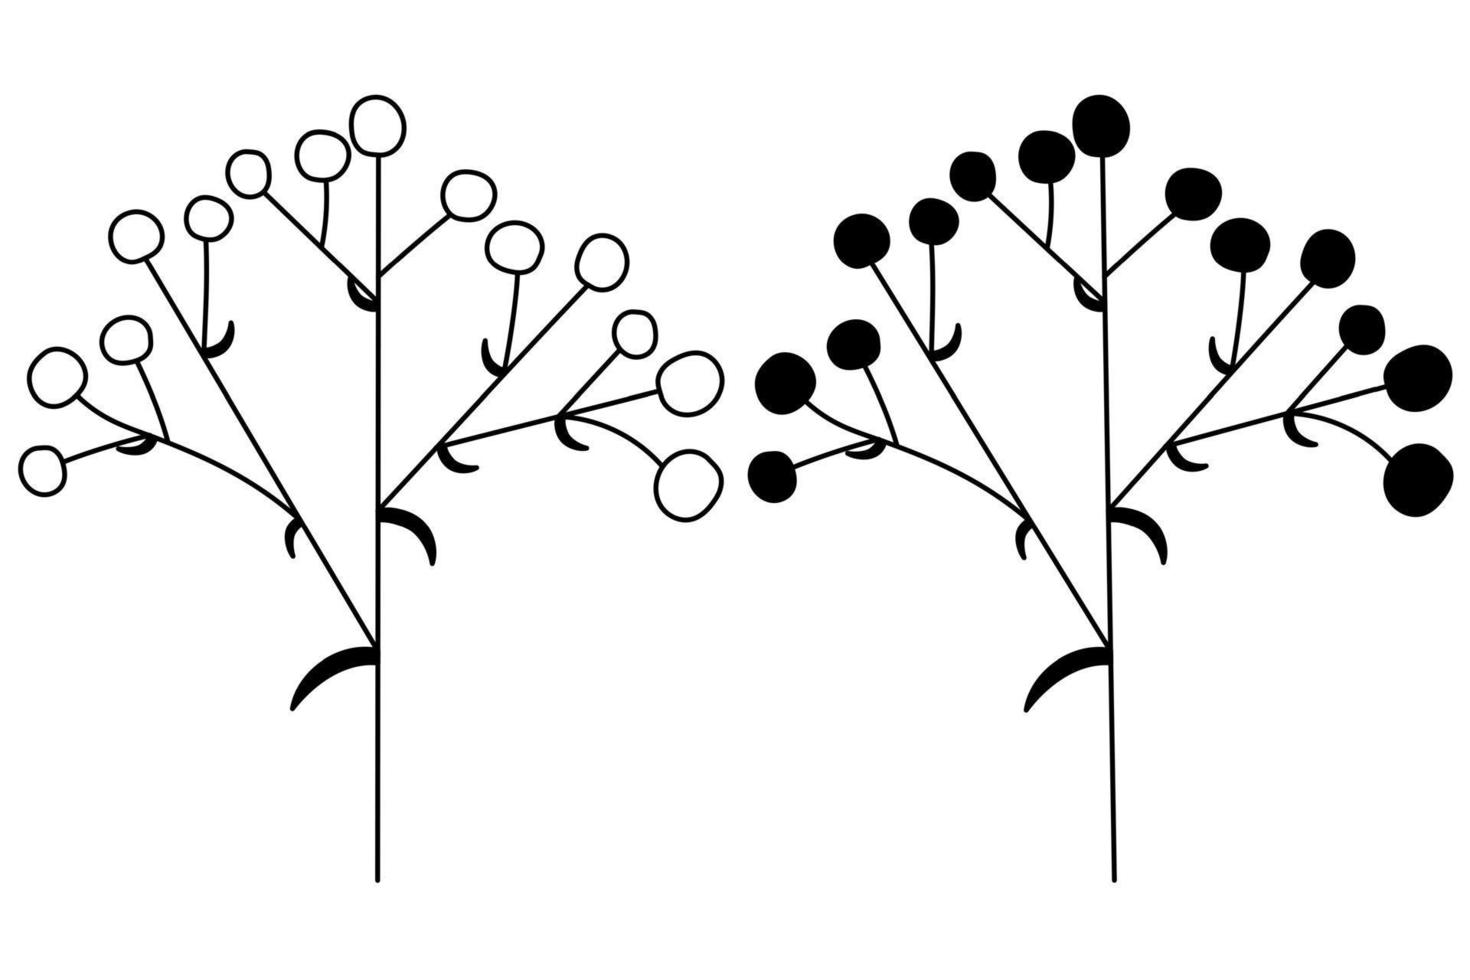 The outline of the silhouette of flower inflorescences in plants on the stem. Vector isolated